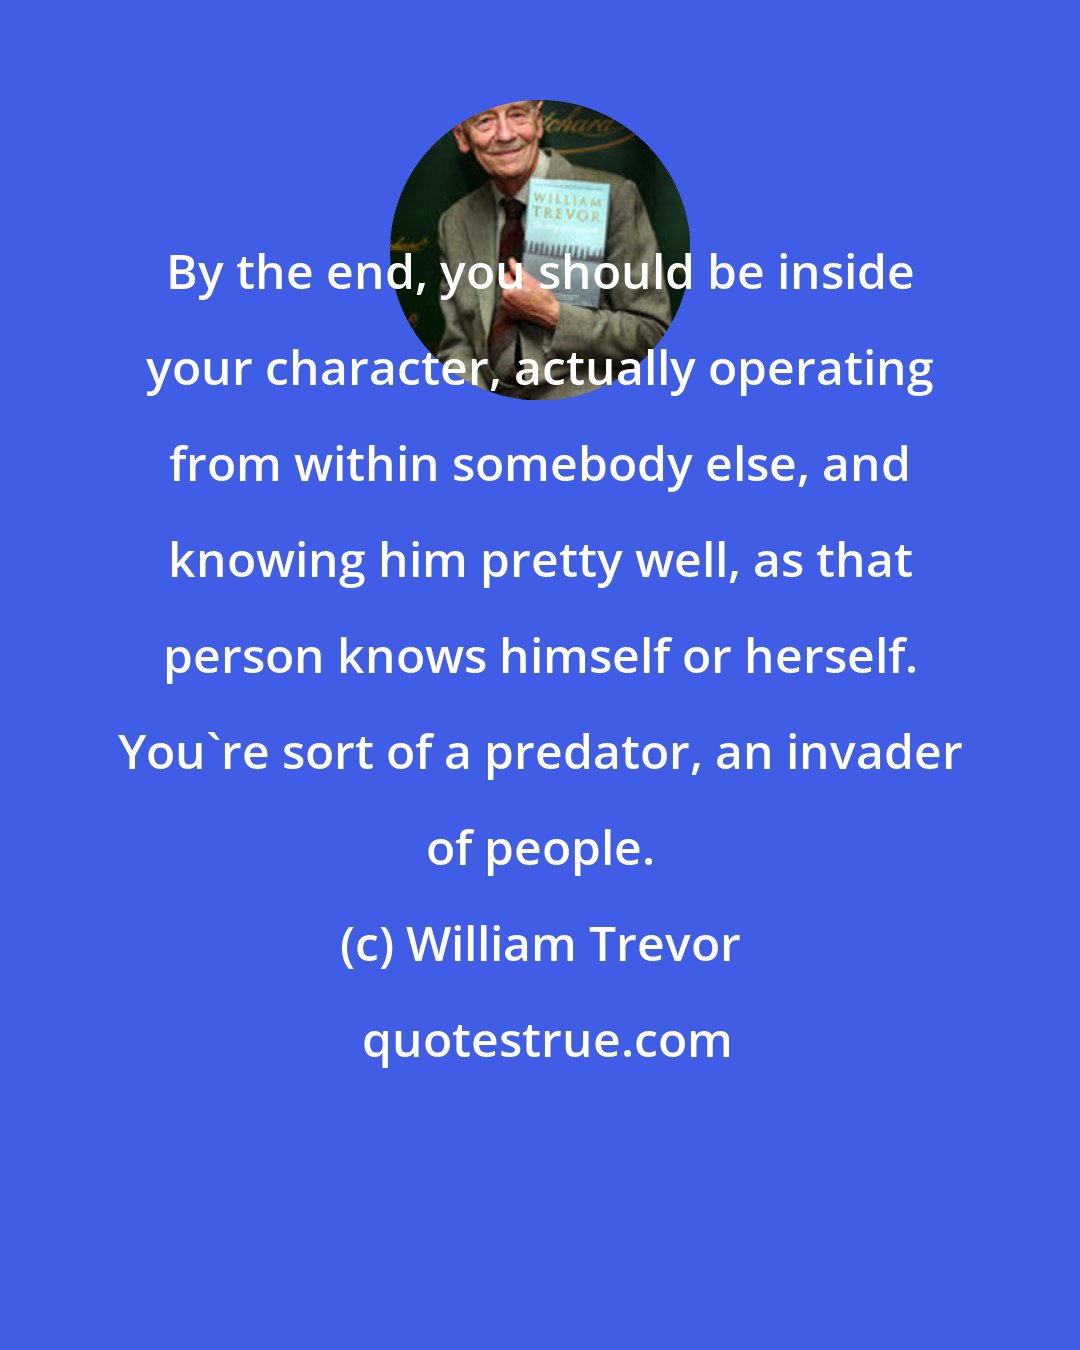 William Trevor: By the end, you should be inside your character, actually operating from within somebody else, and knowing him pretty well, as that person knows himself or herself. You're sort of a predator, an invader of people.